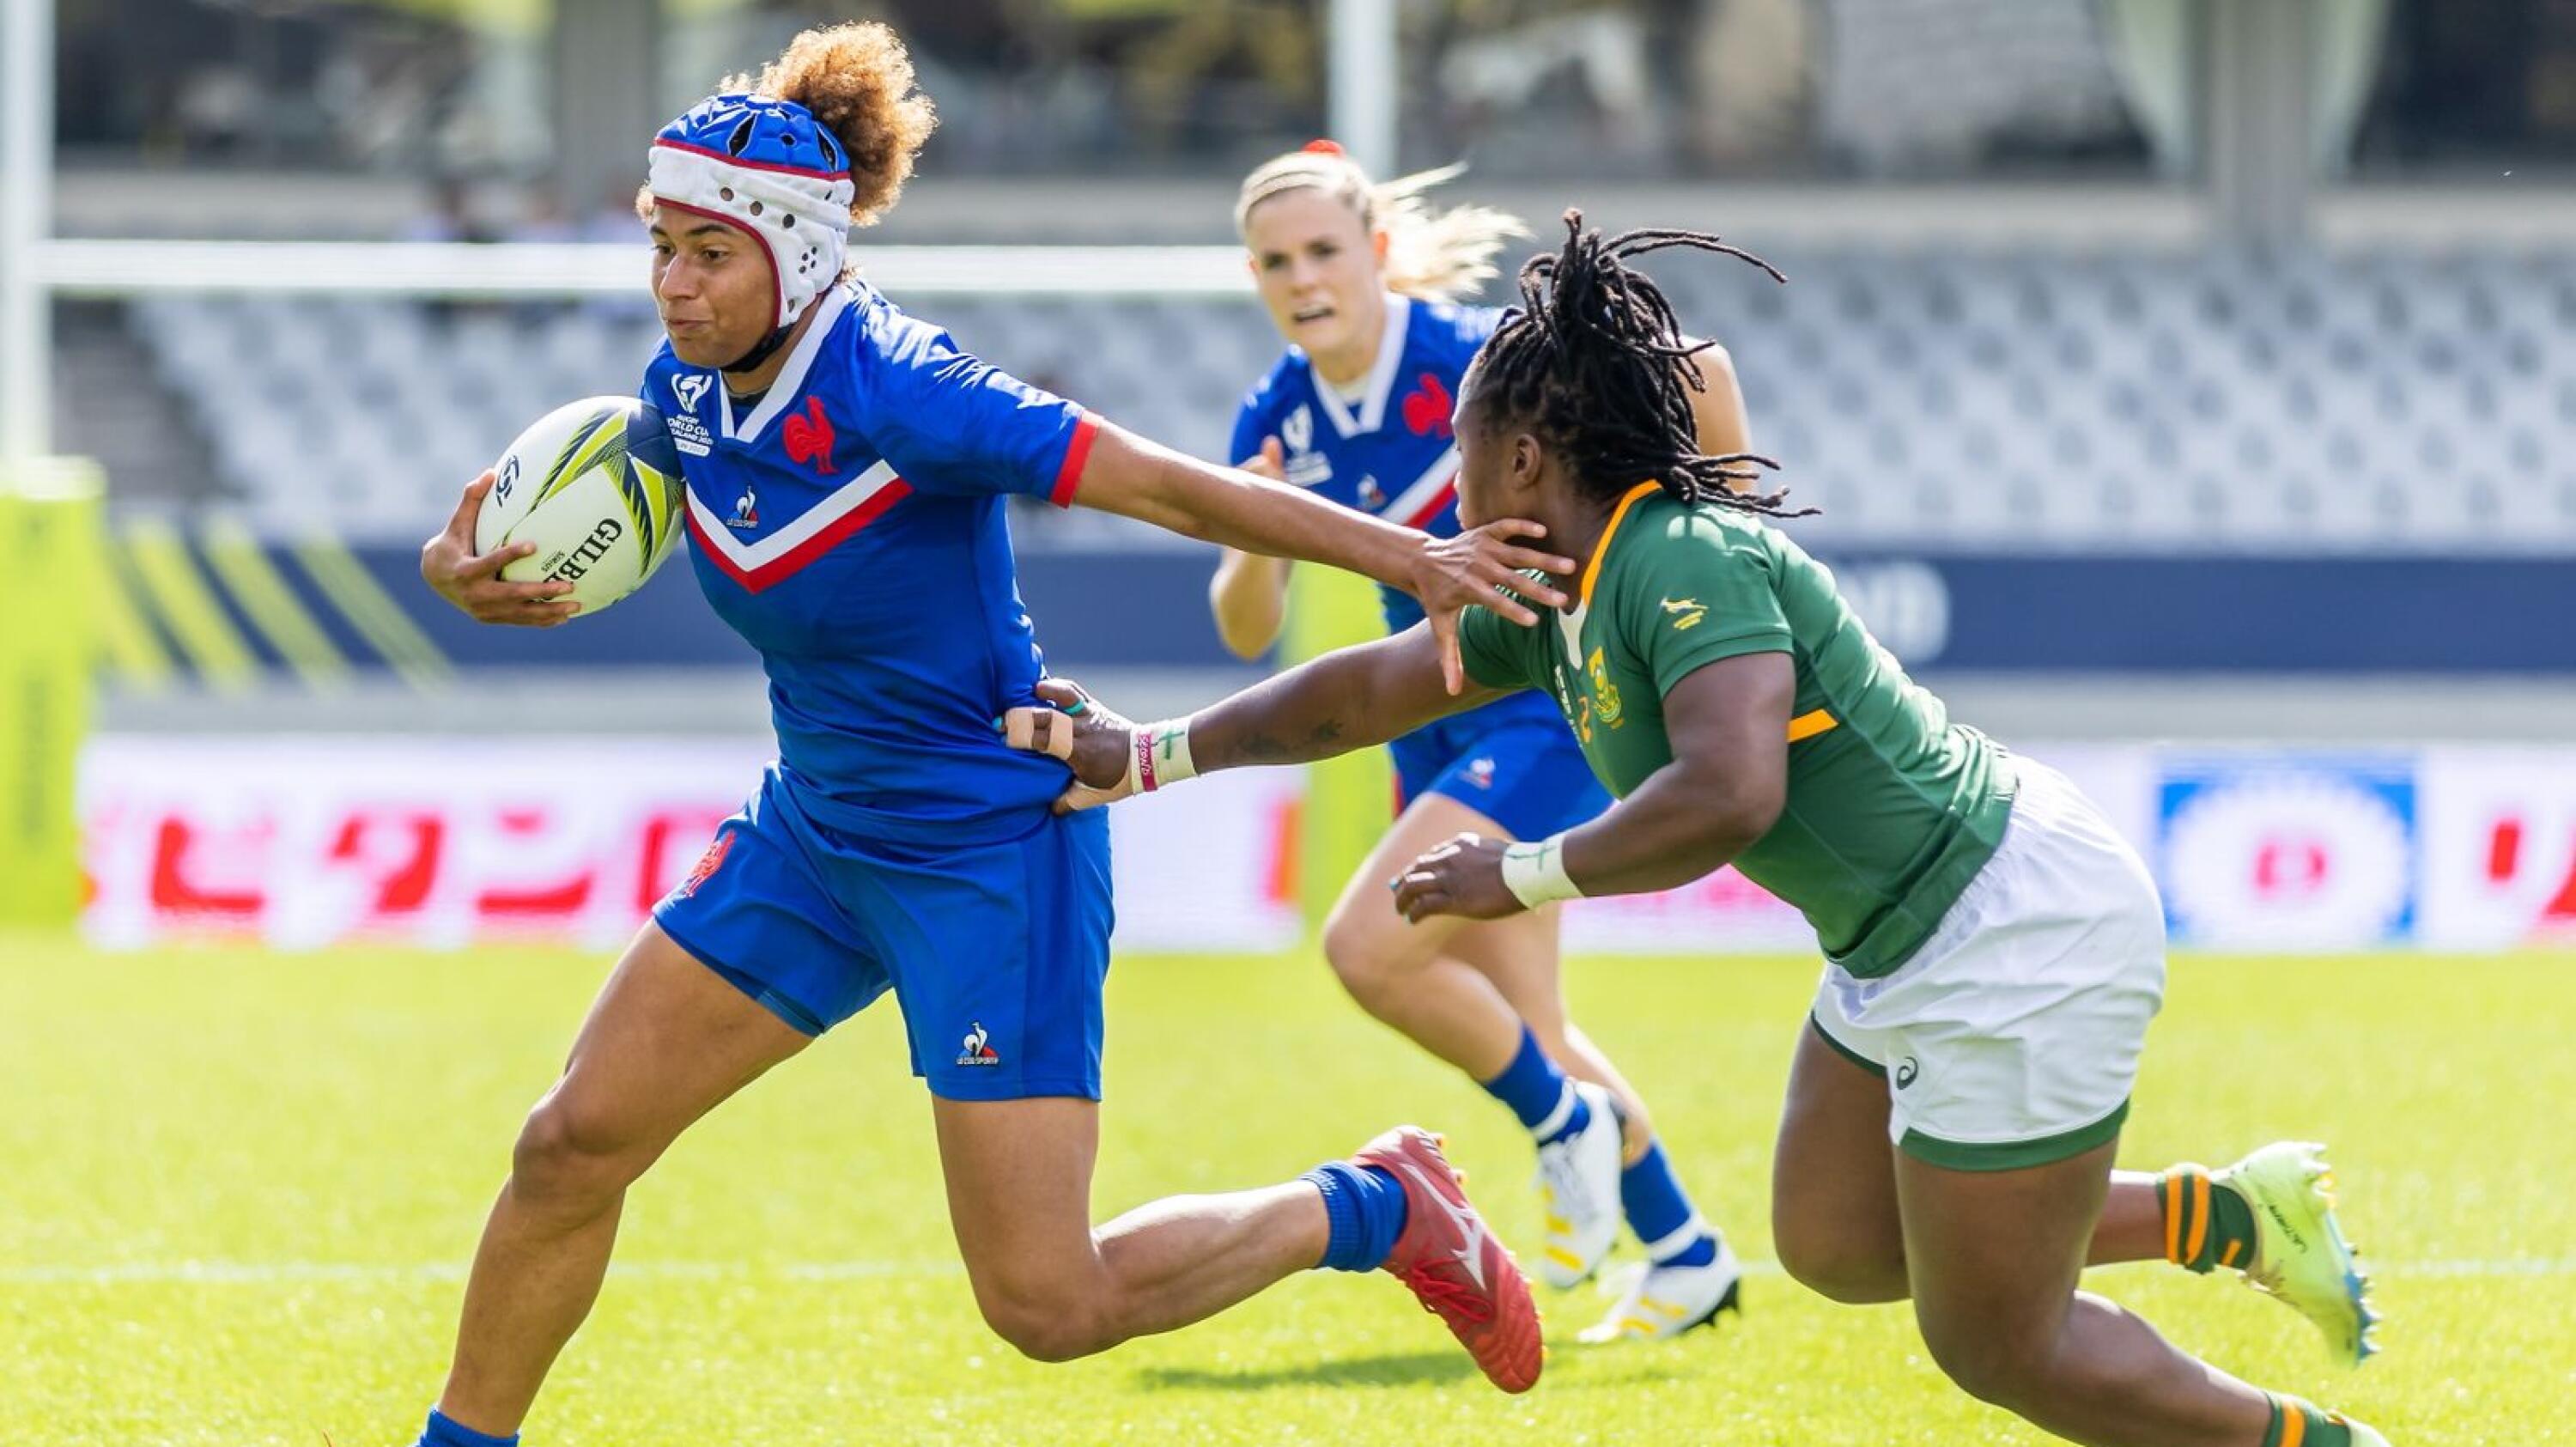 two women’s rugby players in action